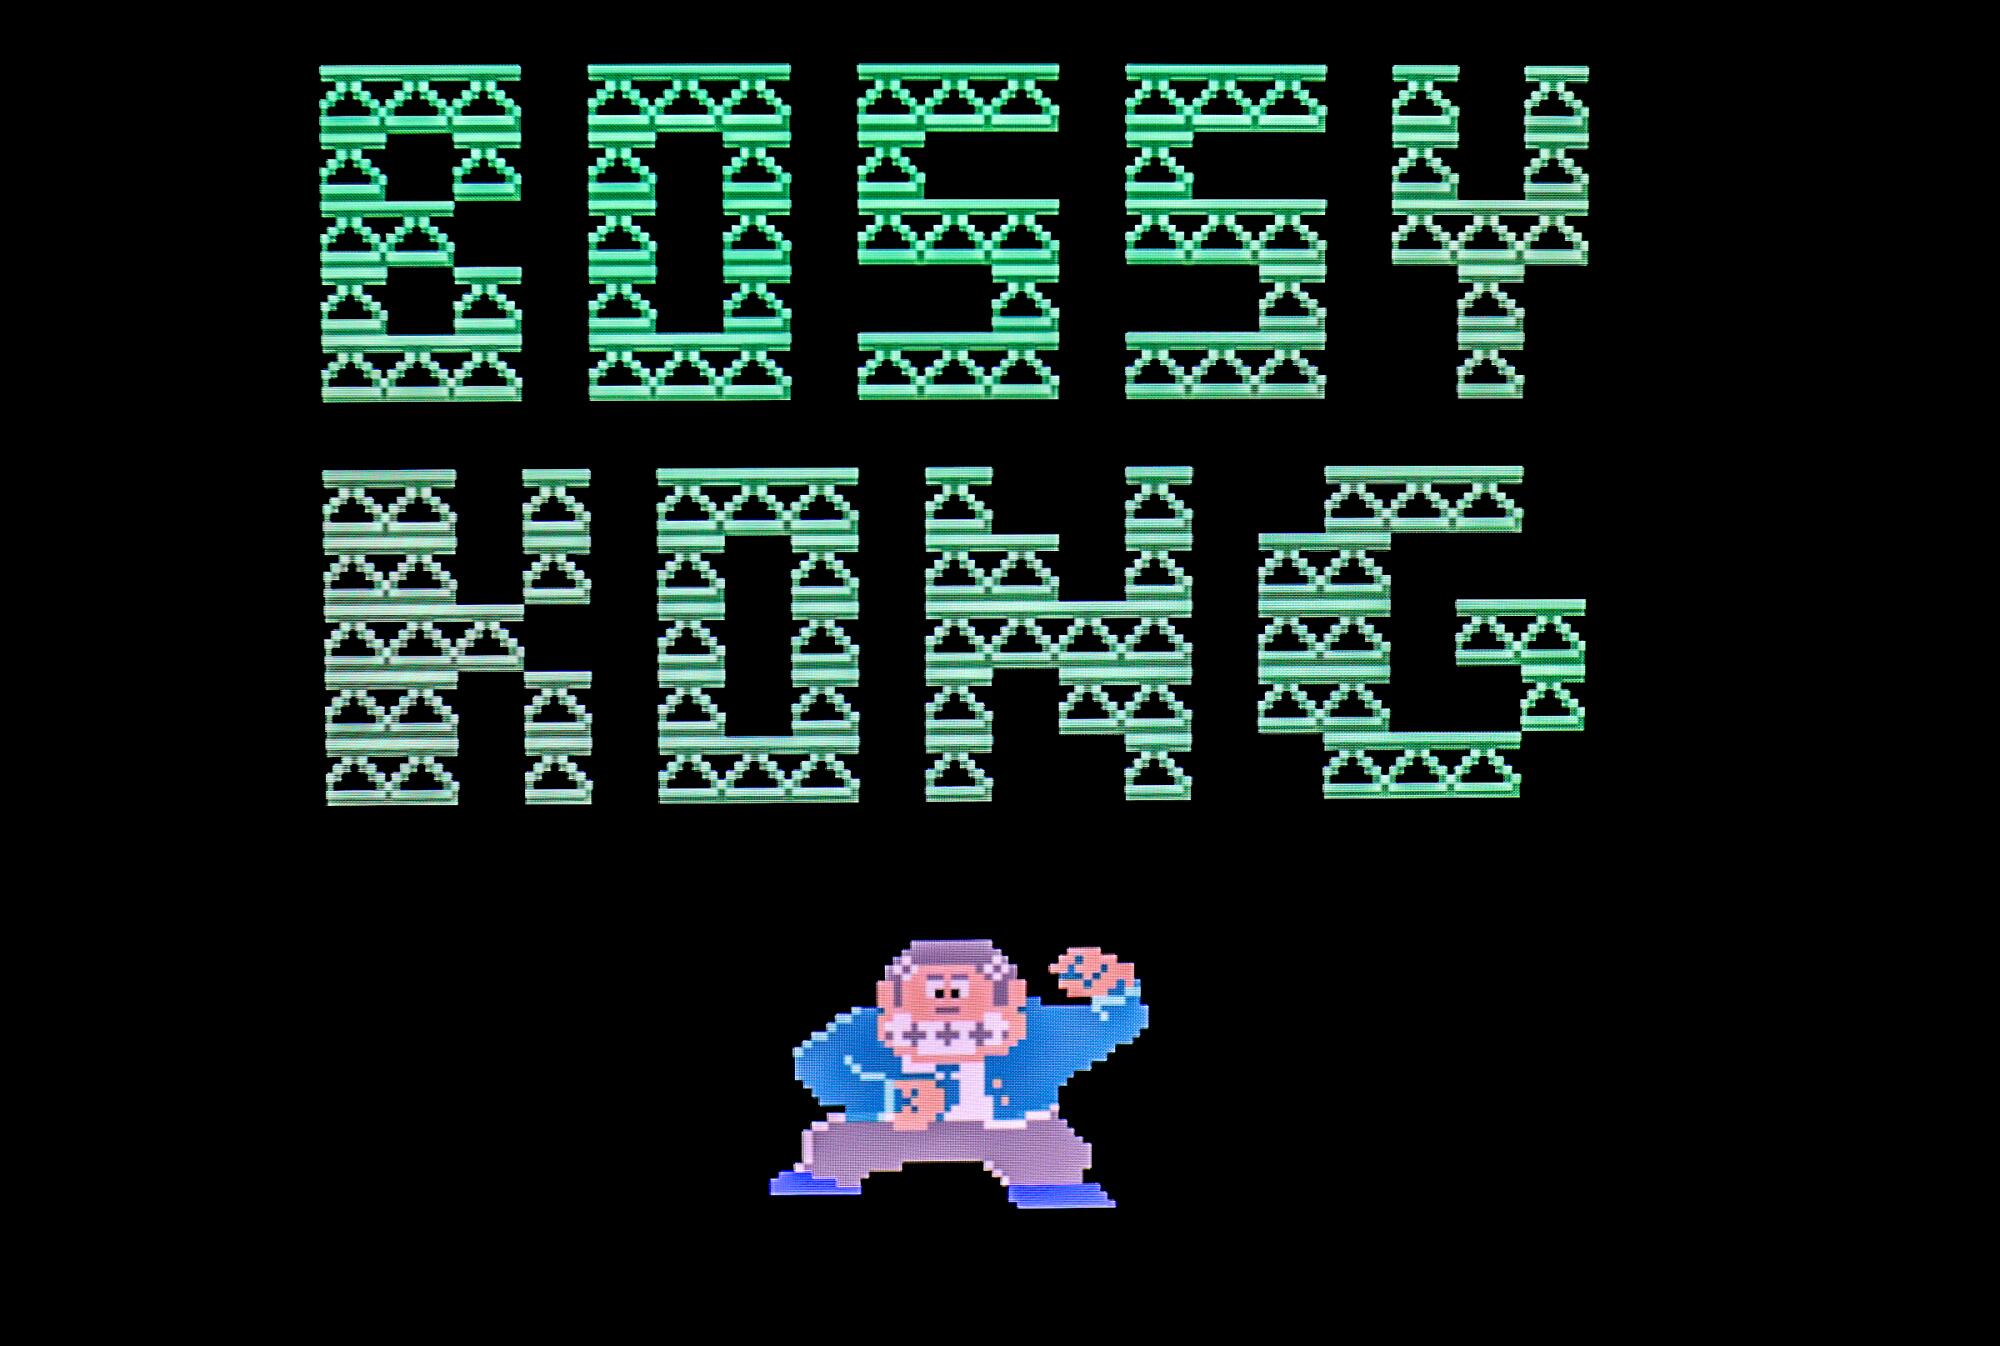 The title screen for "Bossy Kong," presented in capital letters and a small illustration of a monkey in a suit.